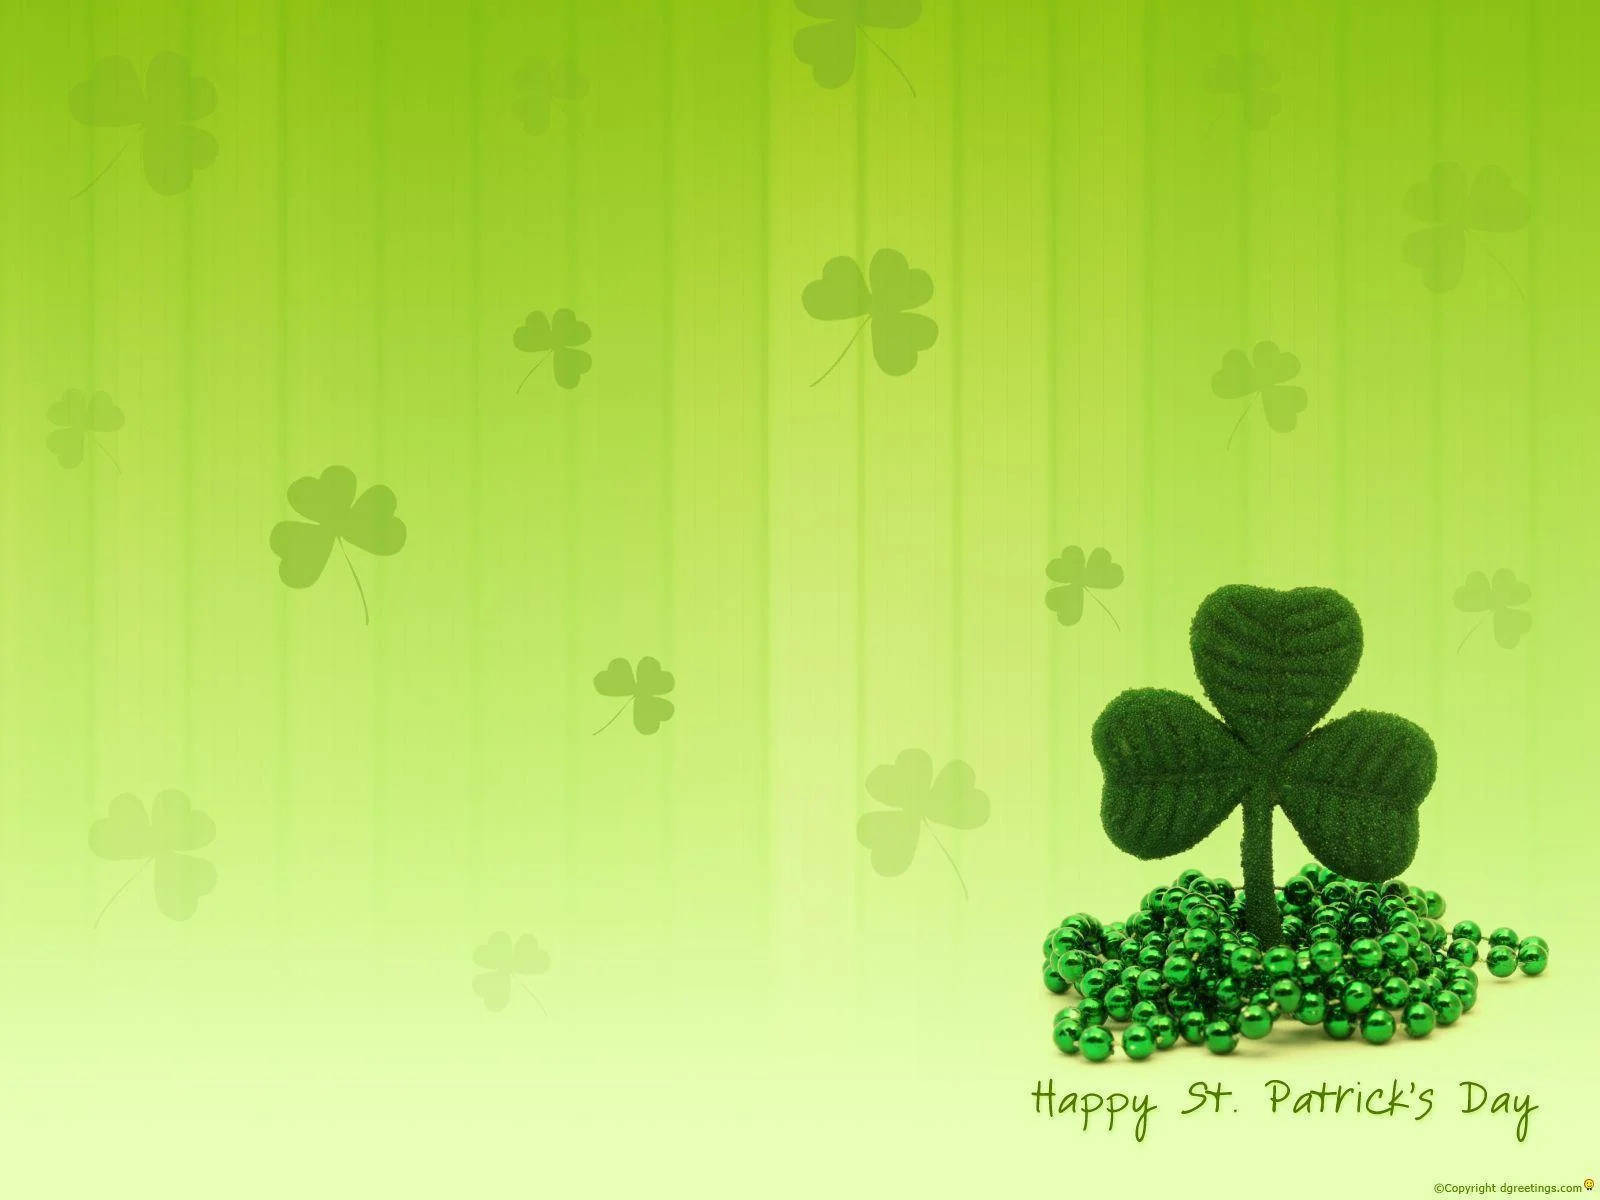 Saint Patrick’s Day With Clover Leaf Wallpaper